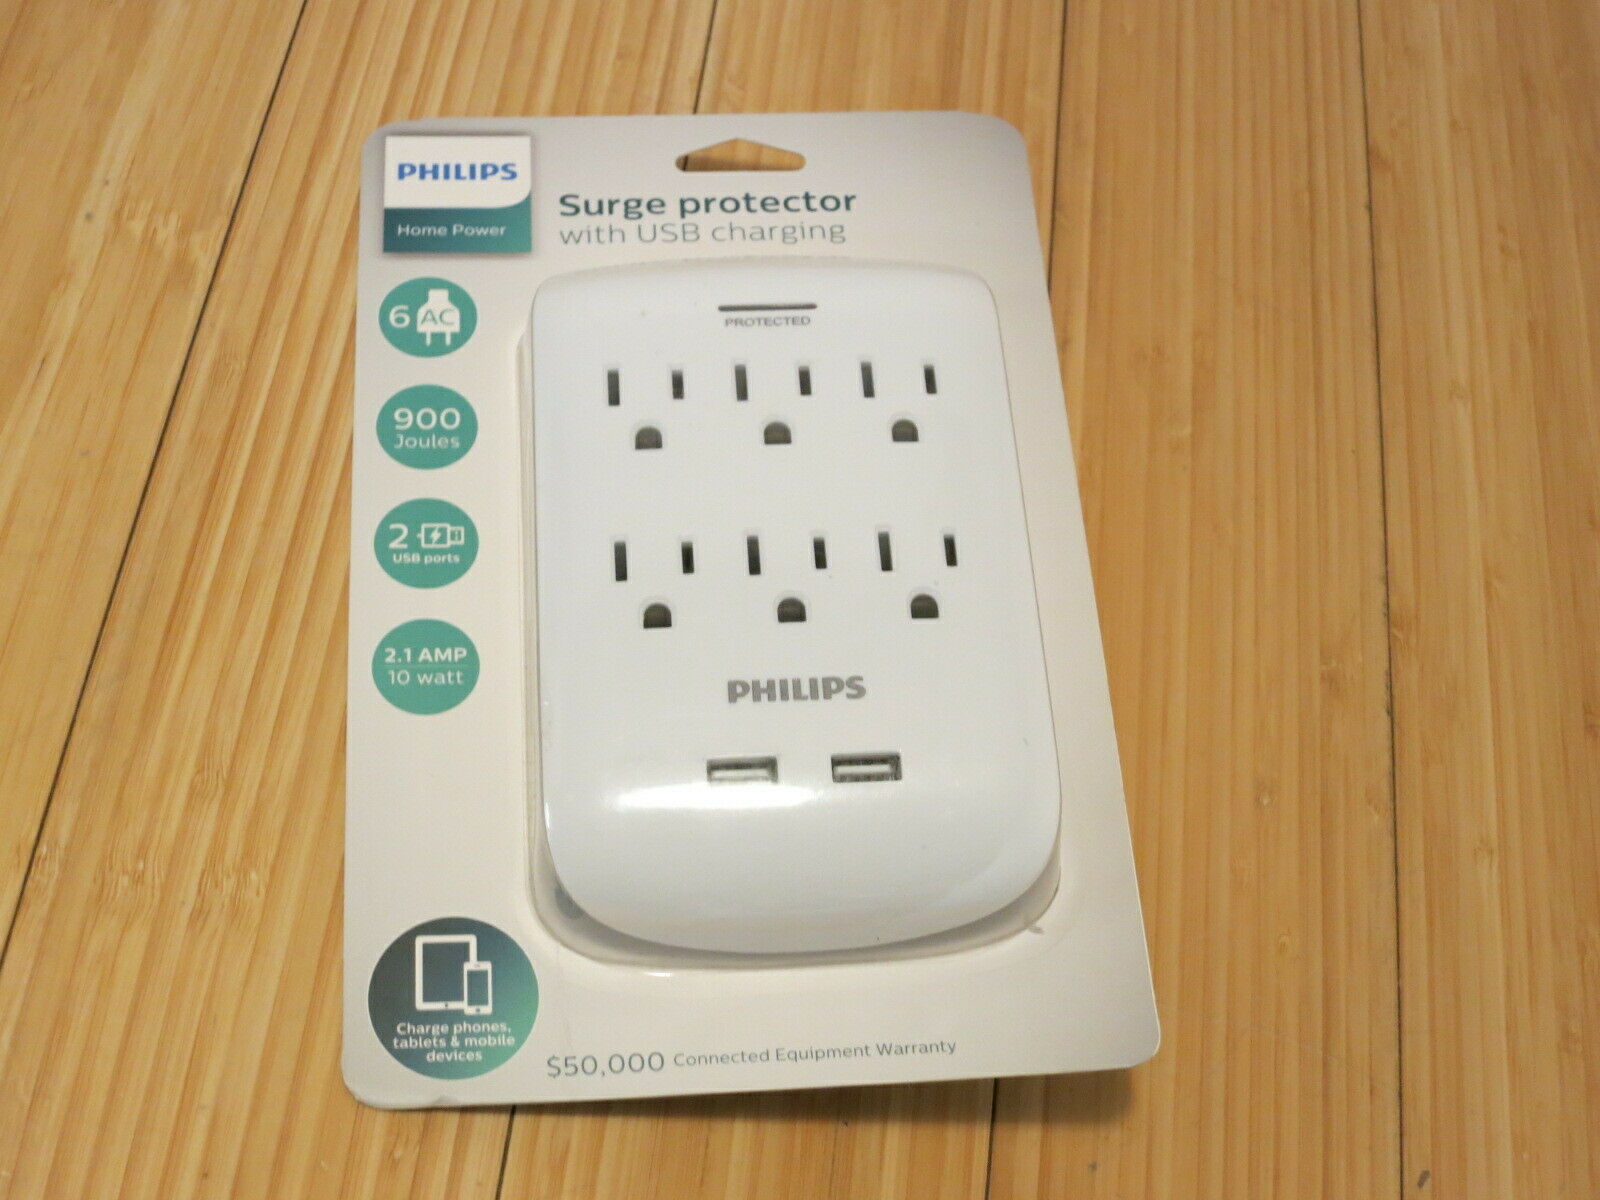 Primary image for PHILIPS 6-Outlet Surge Protector with 2 USB ports (2.1 Amp, 10 Watt)